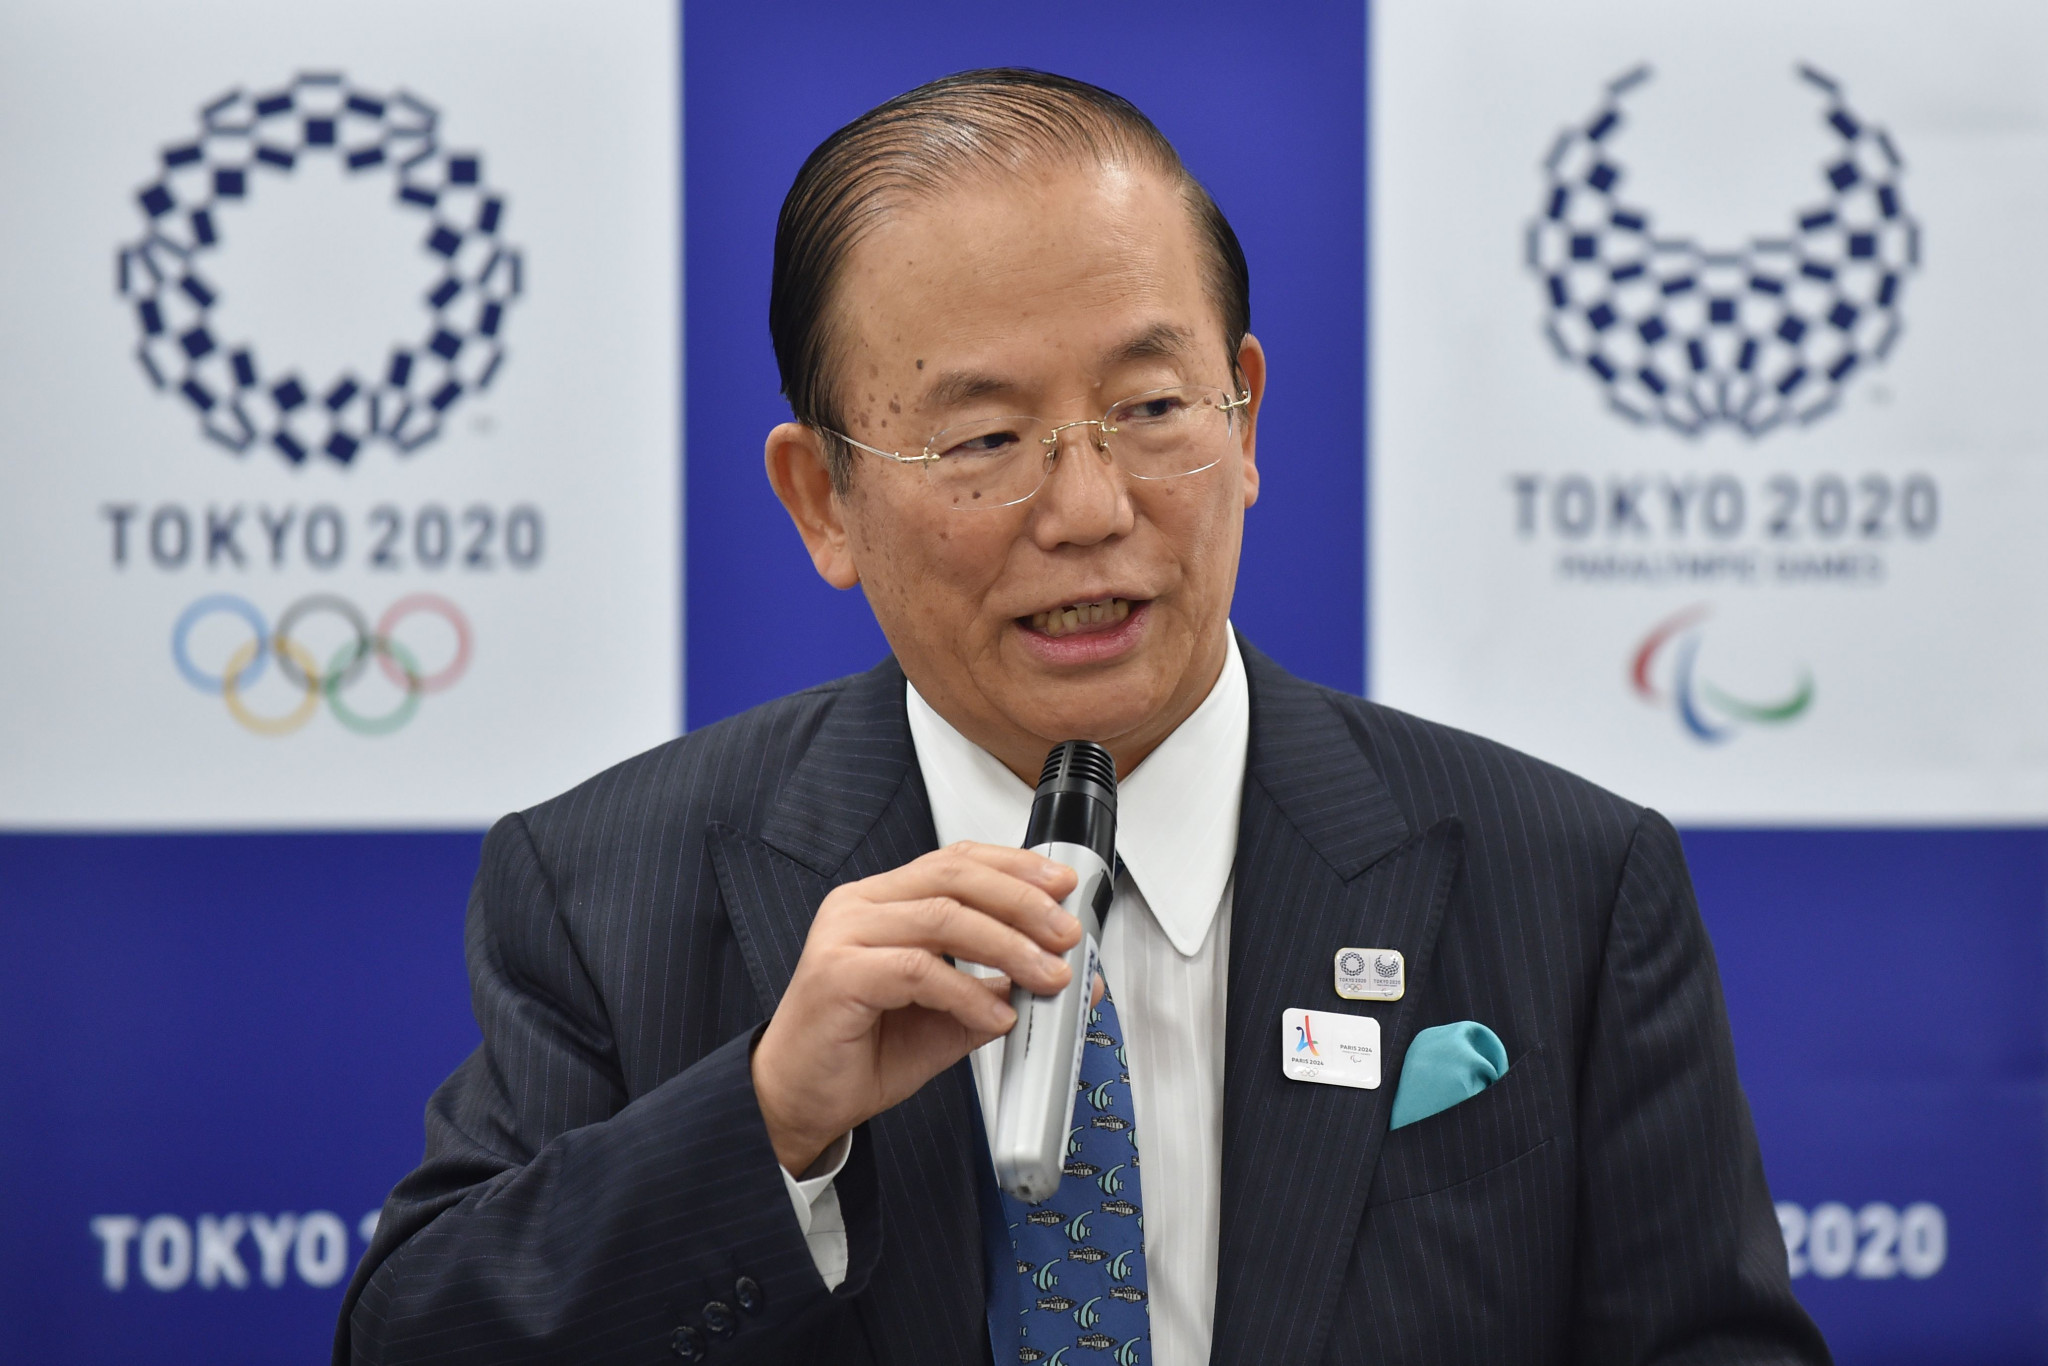 Tokyo 2020 chief executive Toshiro Muto has praised outgoing IPC counterpart Xavier Gonzalez ©Getty Images